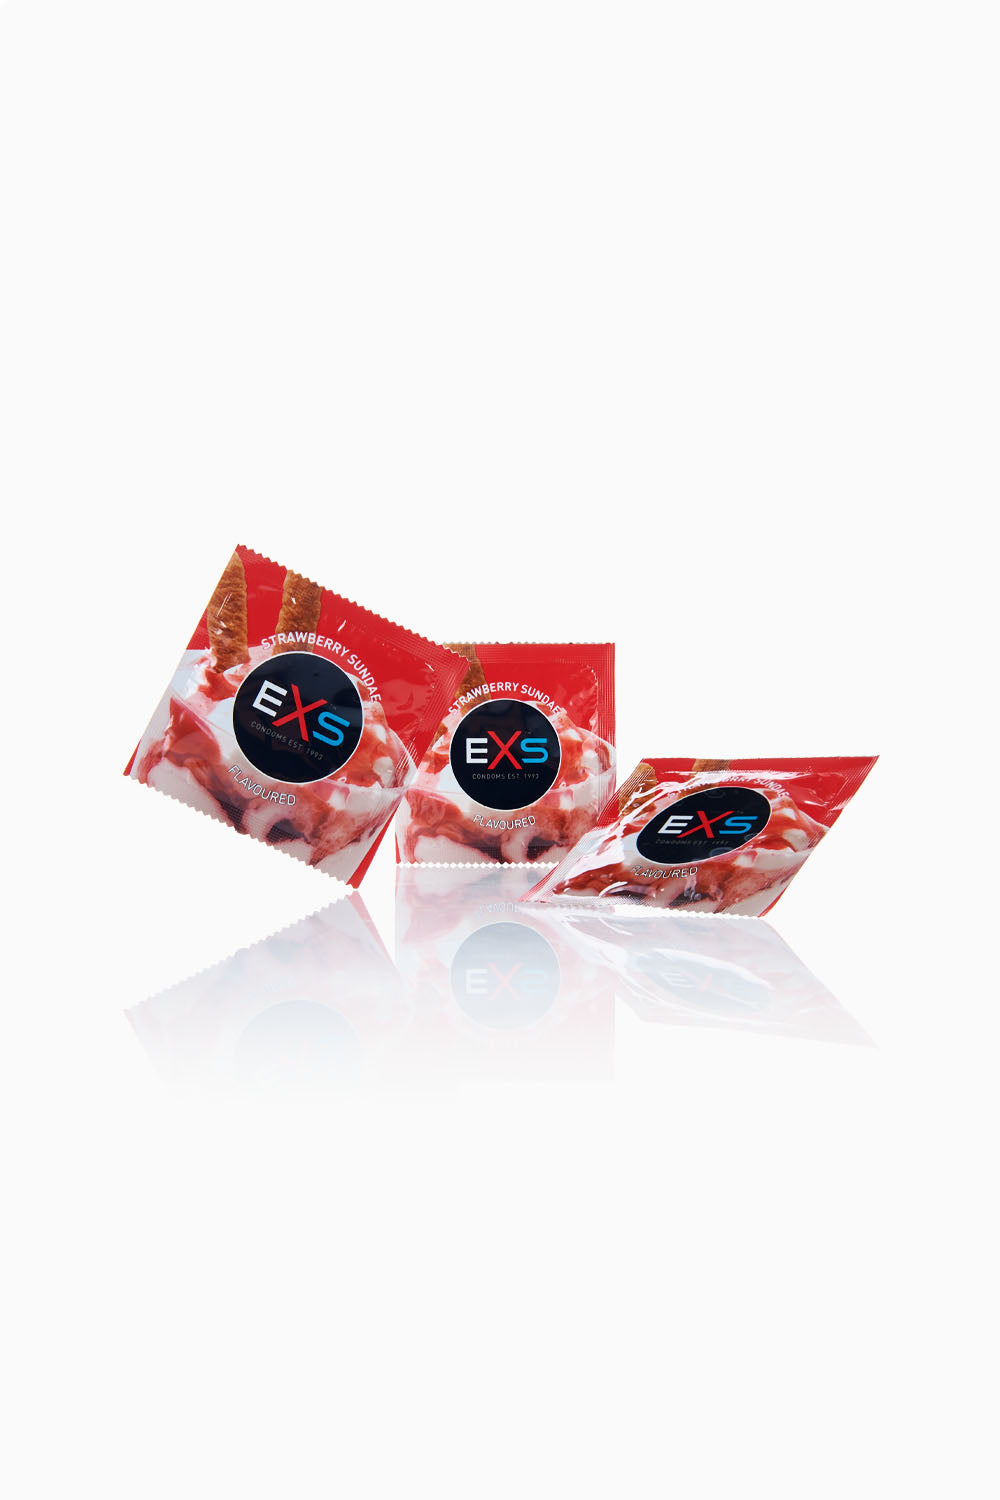 EXS Strawberry Condoms 50 Pack